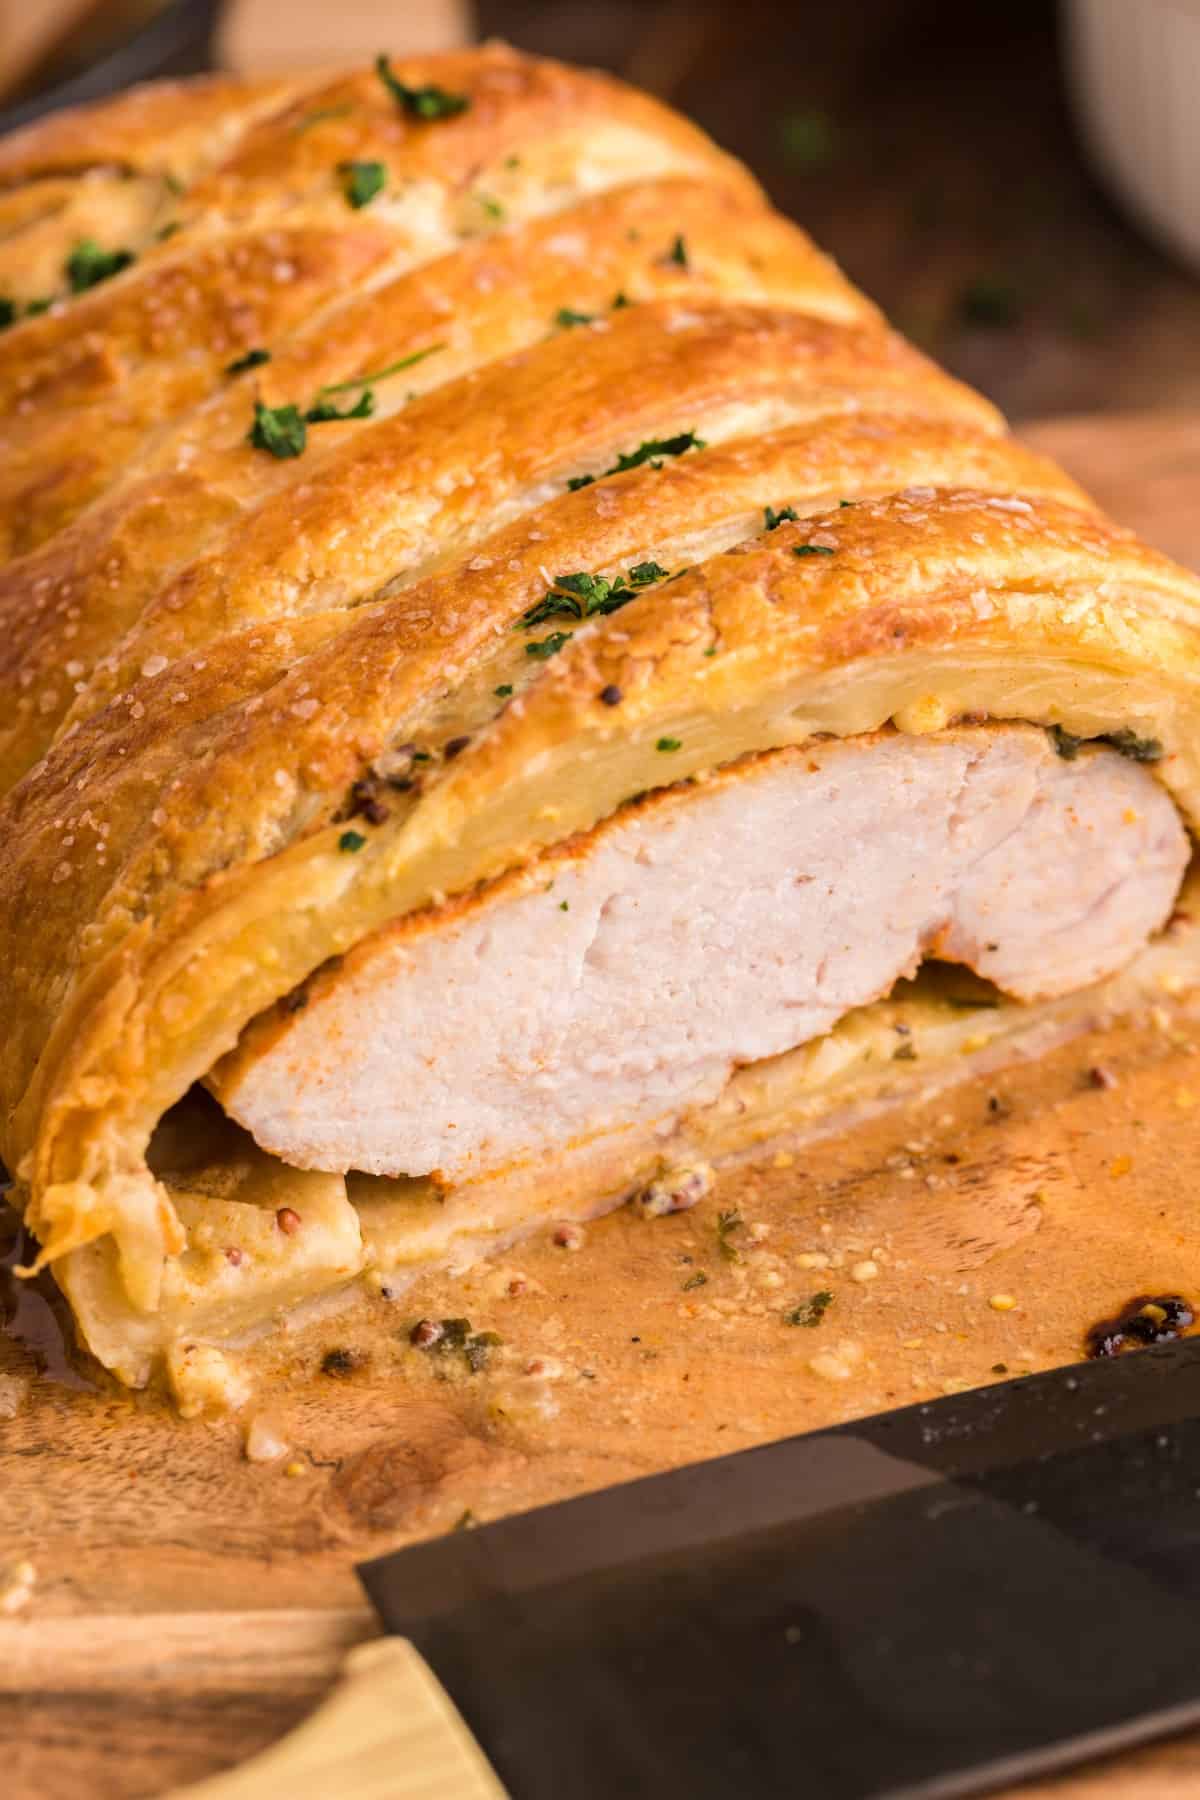 Showing the inside of a pork tenderloin in puff pastry. 